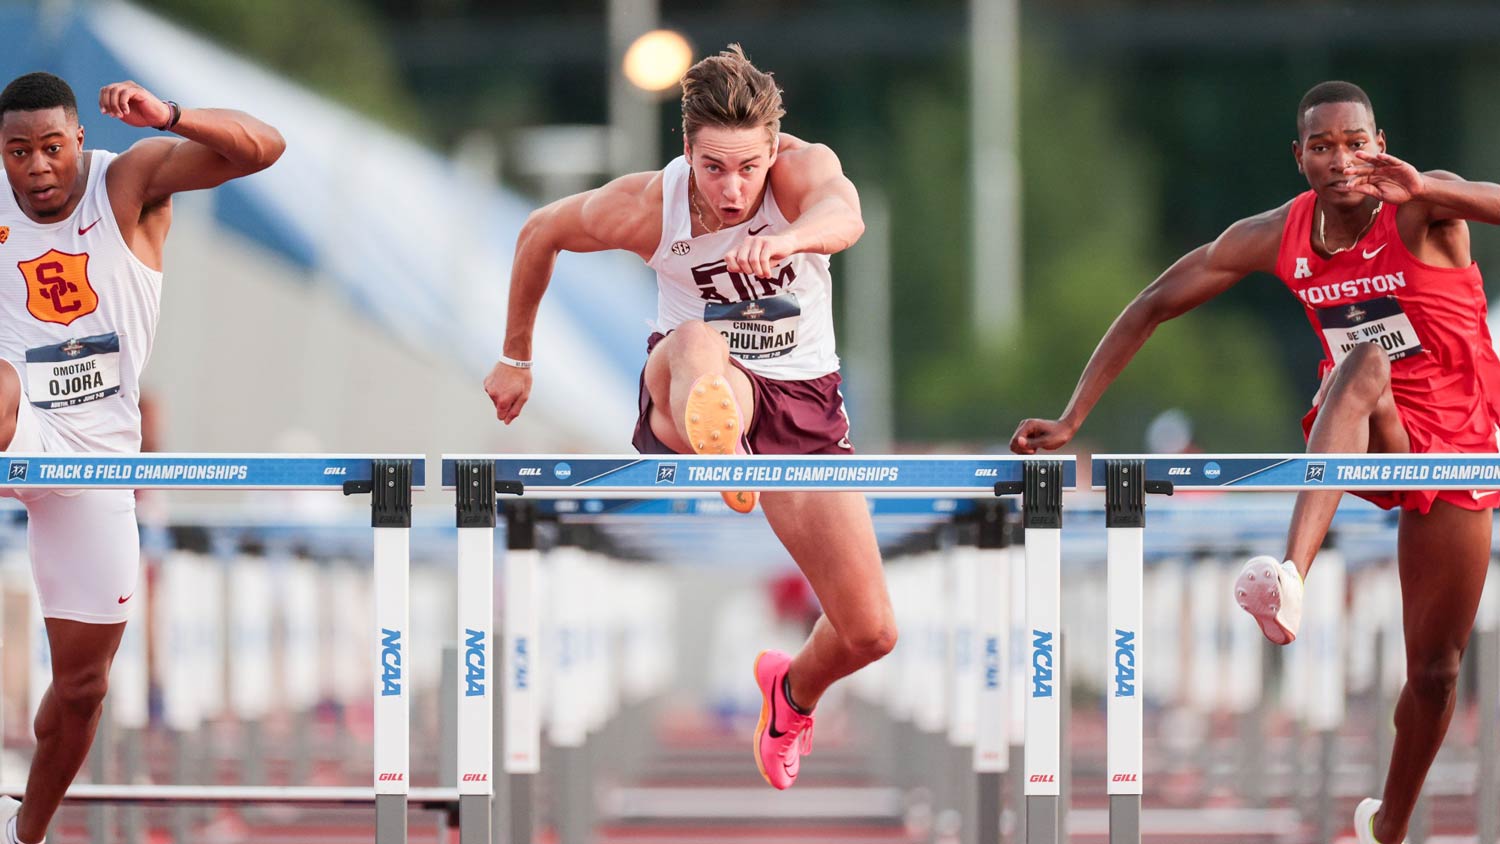 A ϲʹ̳ track athlete leaps over a hurdle during a race